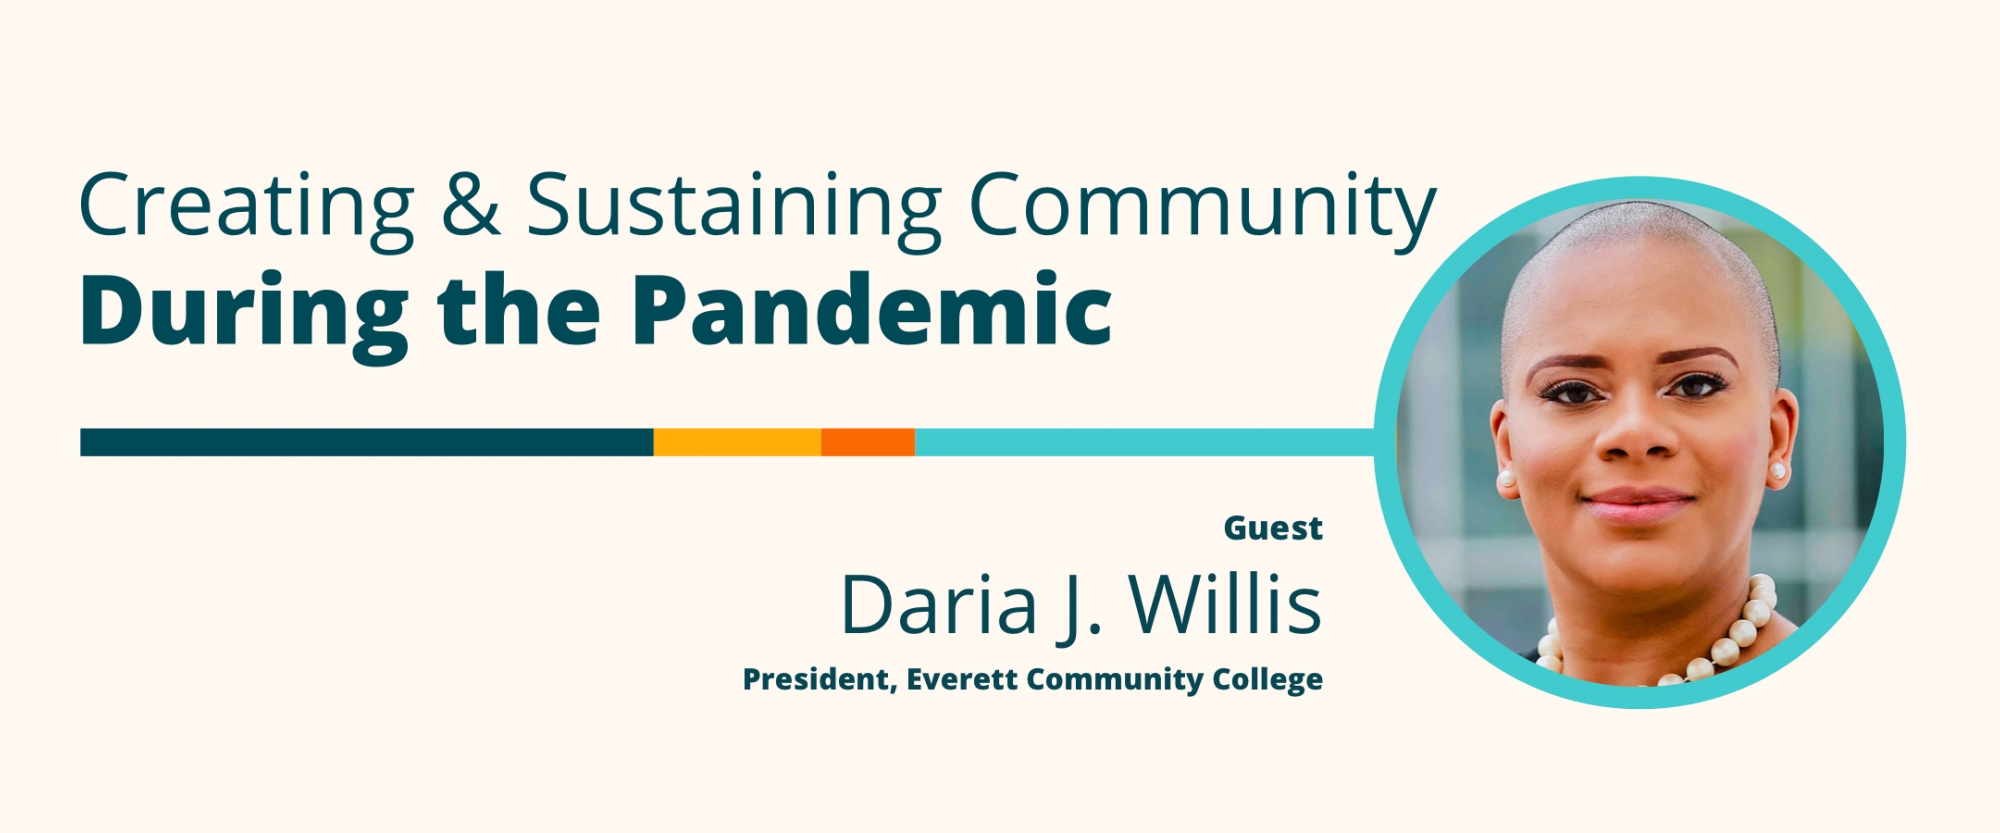 Creating and Sustaining Community During the Pandemic